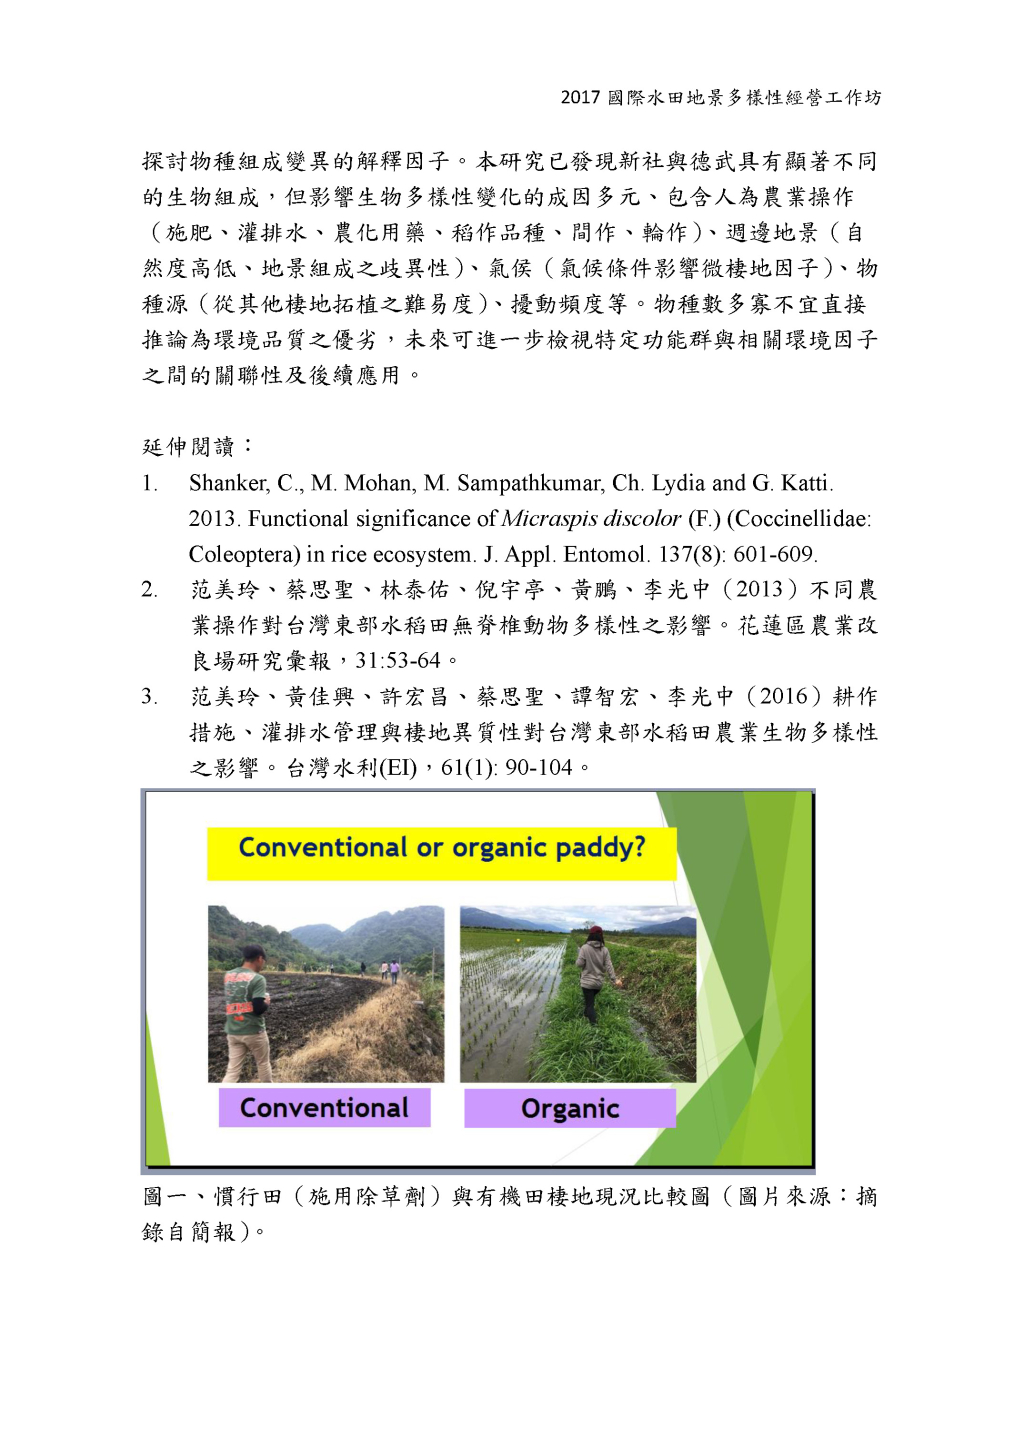 Study in Biodiversity between Conventional and Organic Paddy and Beneficial Insect Habitat Manipulation.-3